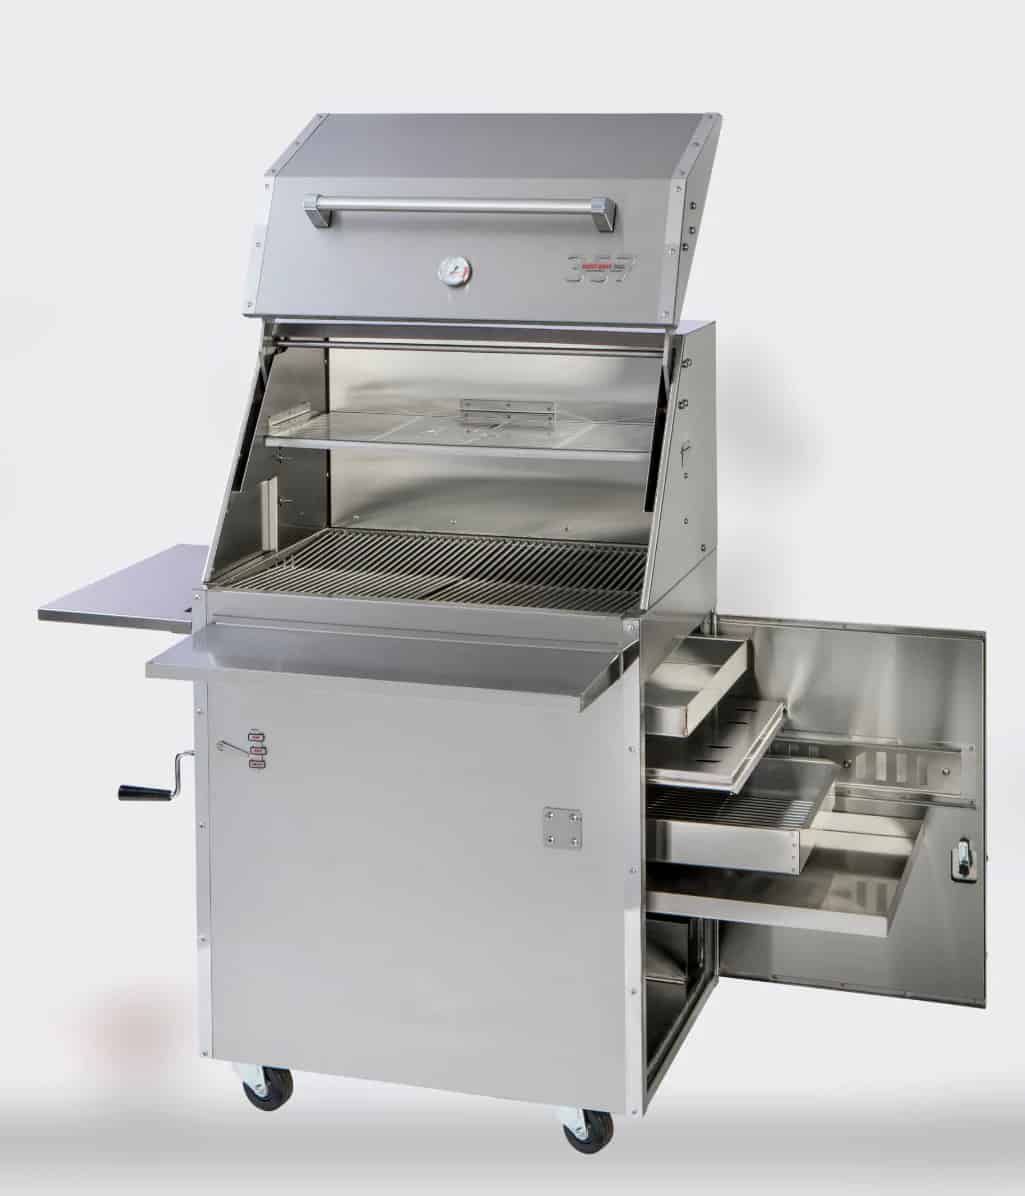 Hasty Bake 357 Pro with lid and all drawers opened.